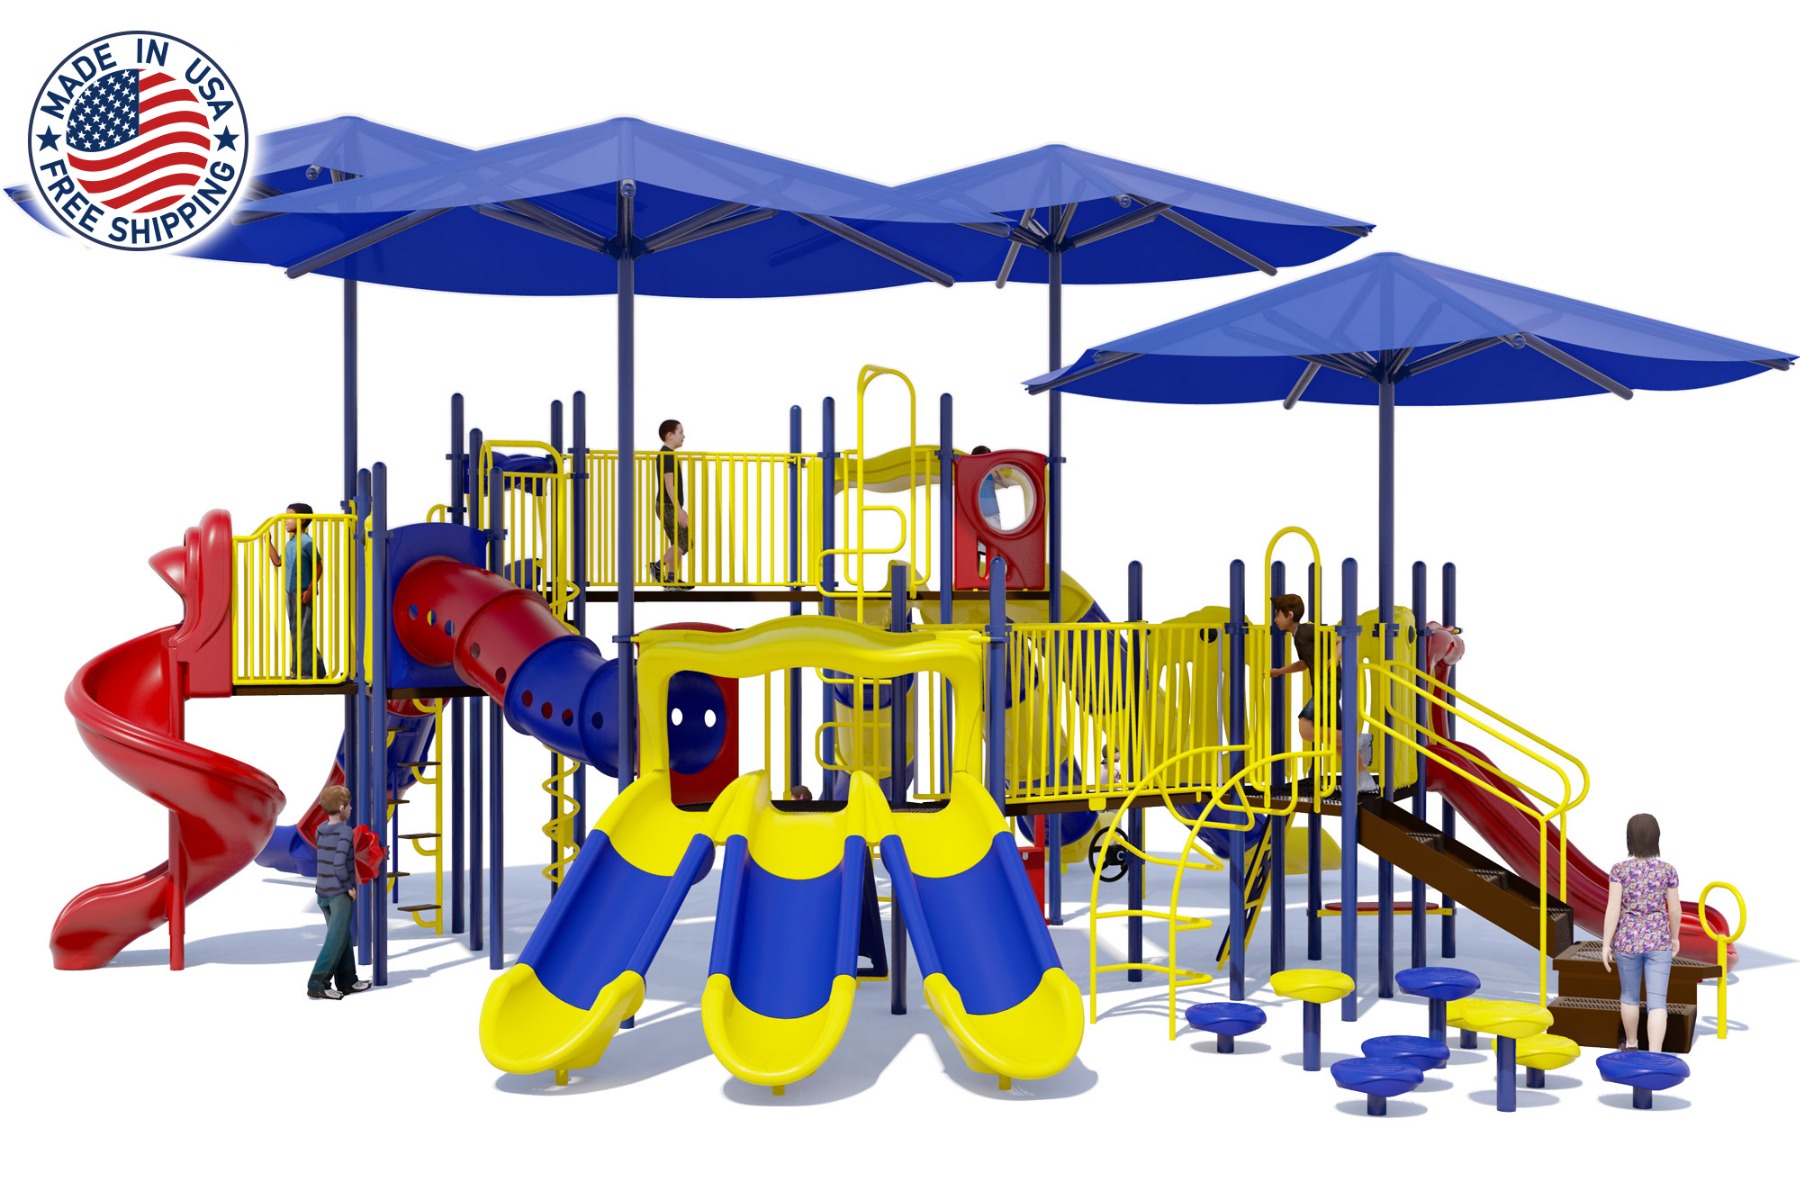 Budget Playground - Made in America - Rear